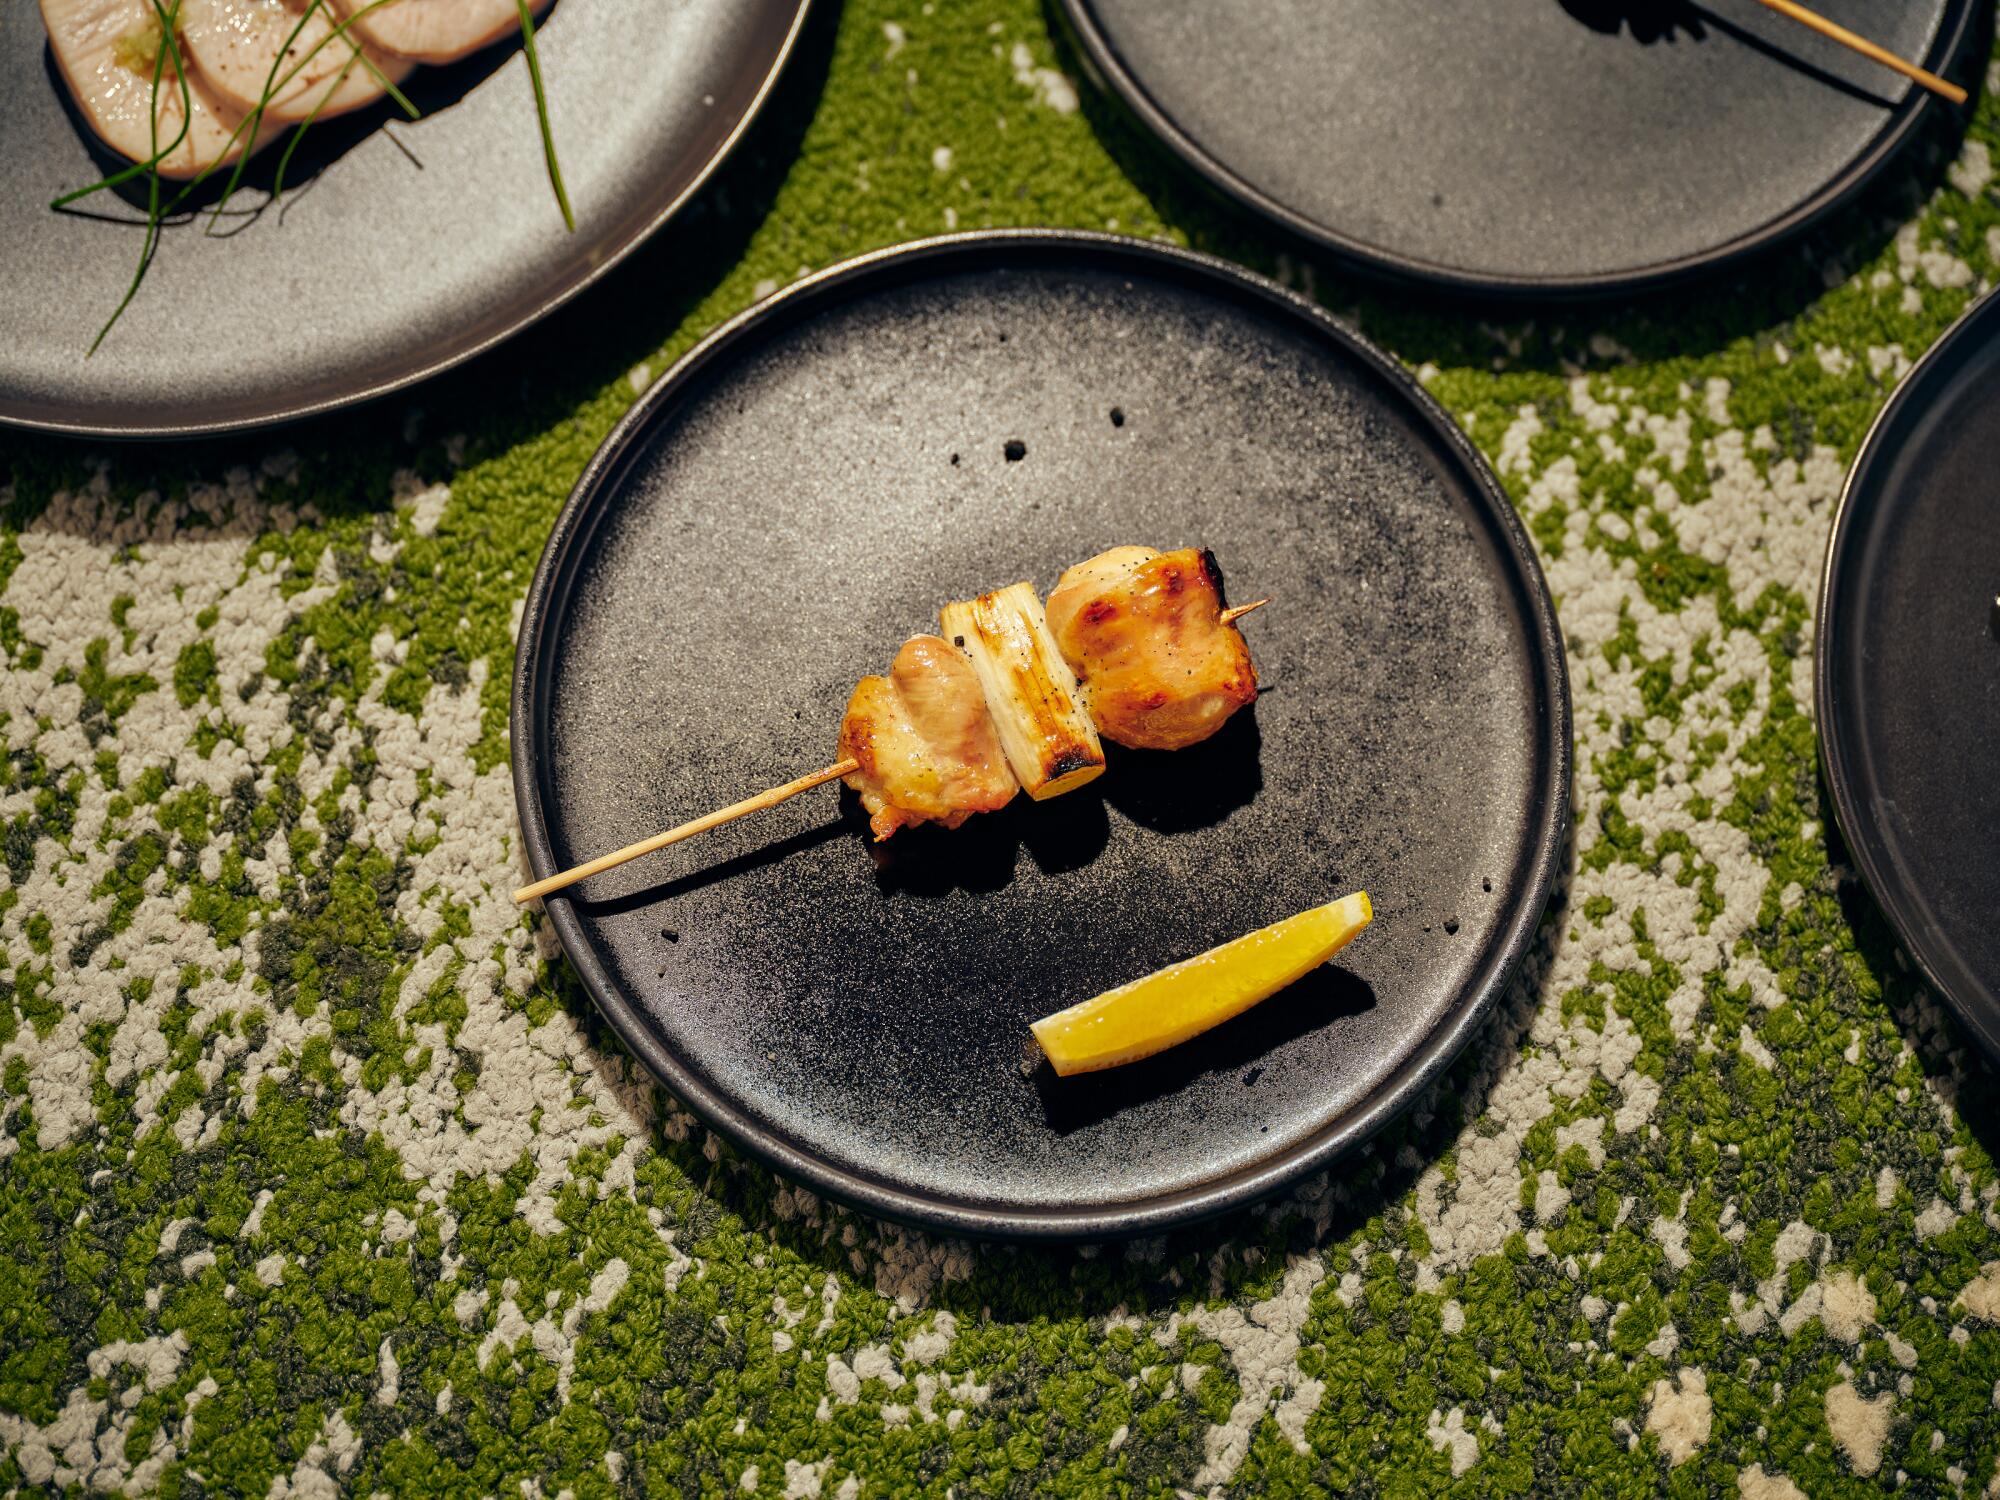 A single chicken oyster negima skewer on a black plate.